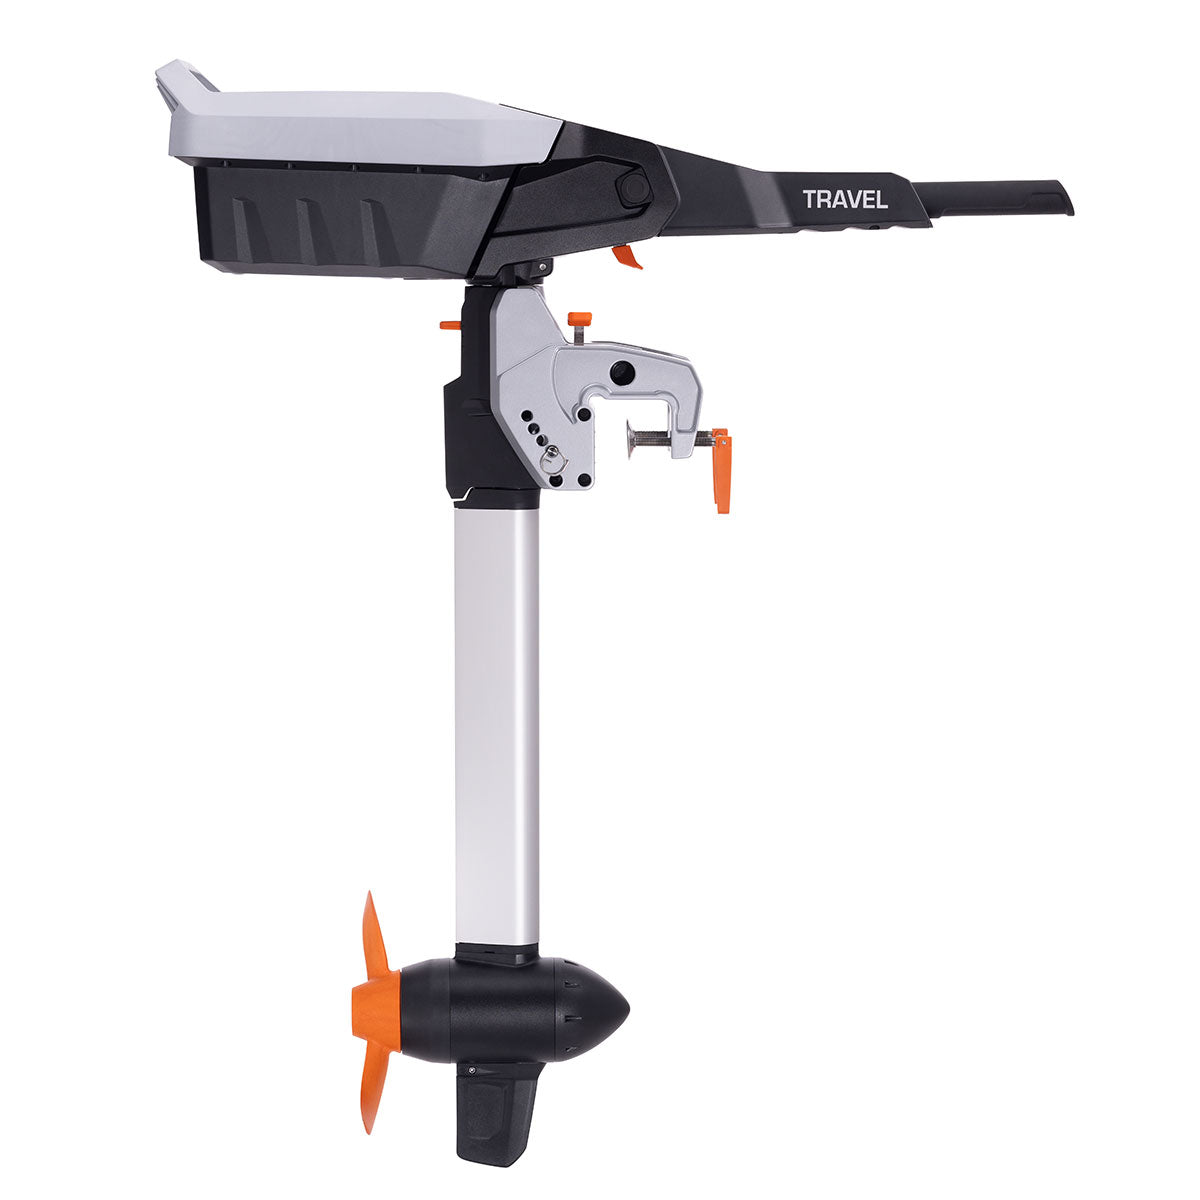 Torqeedo Travel S 1.1kW/3hp Electric Outboard